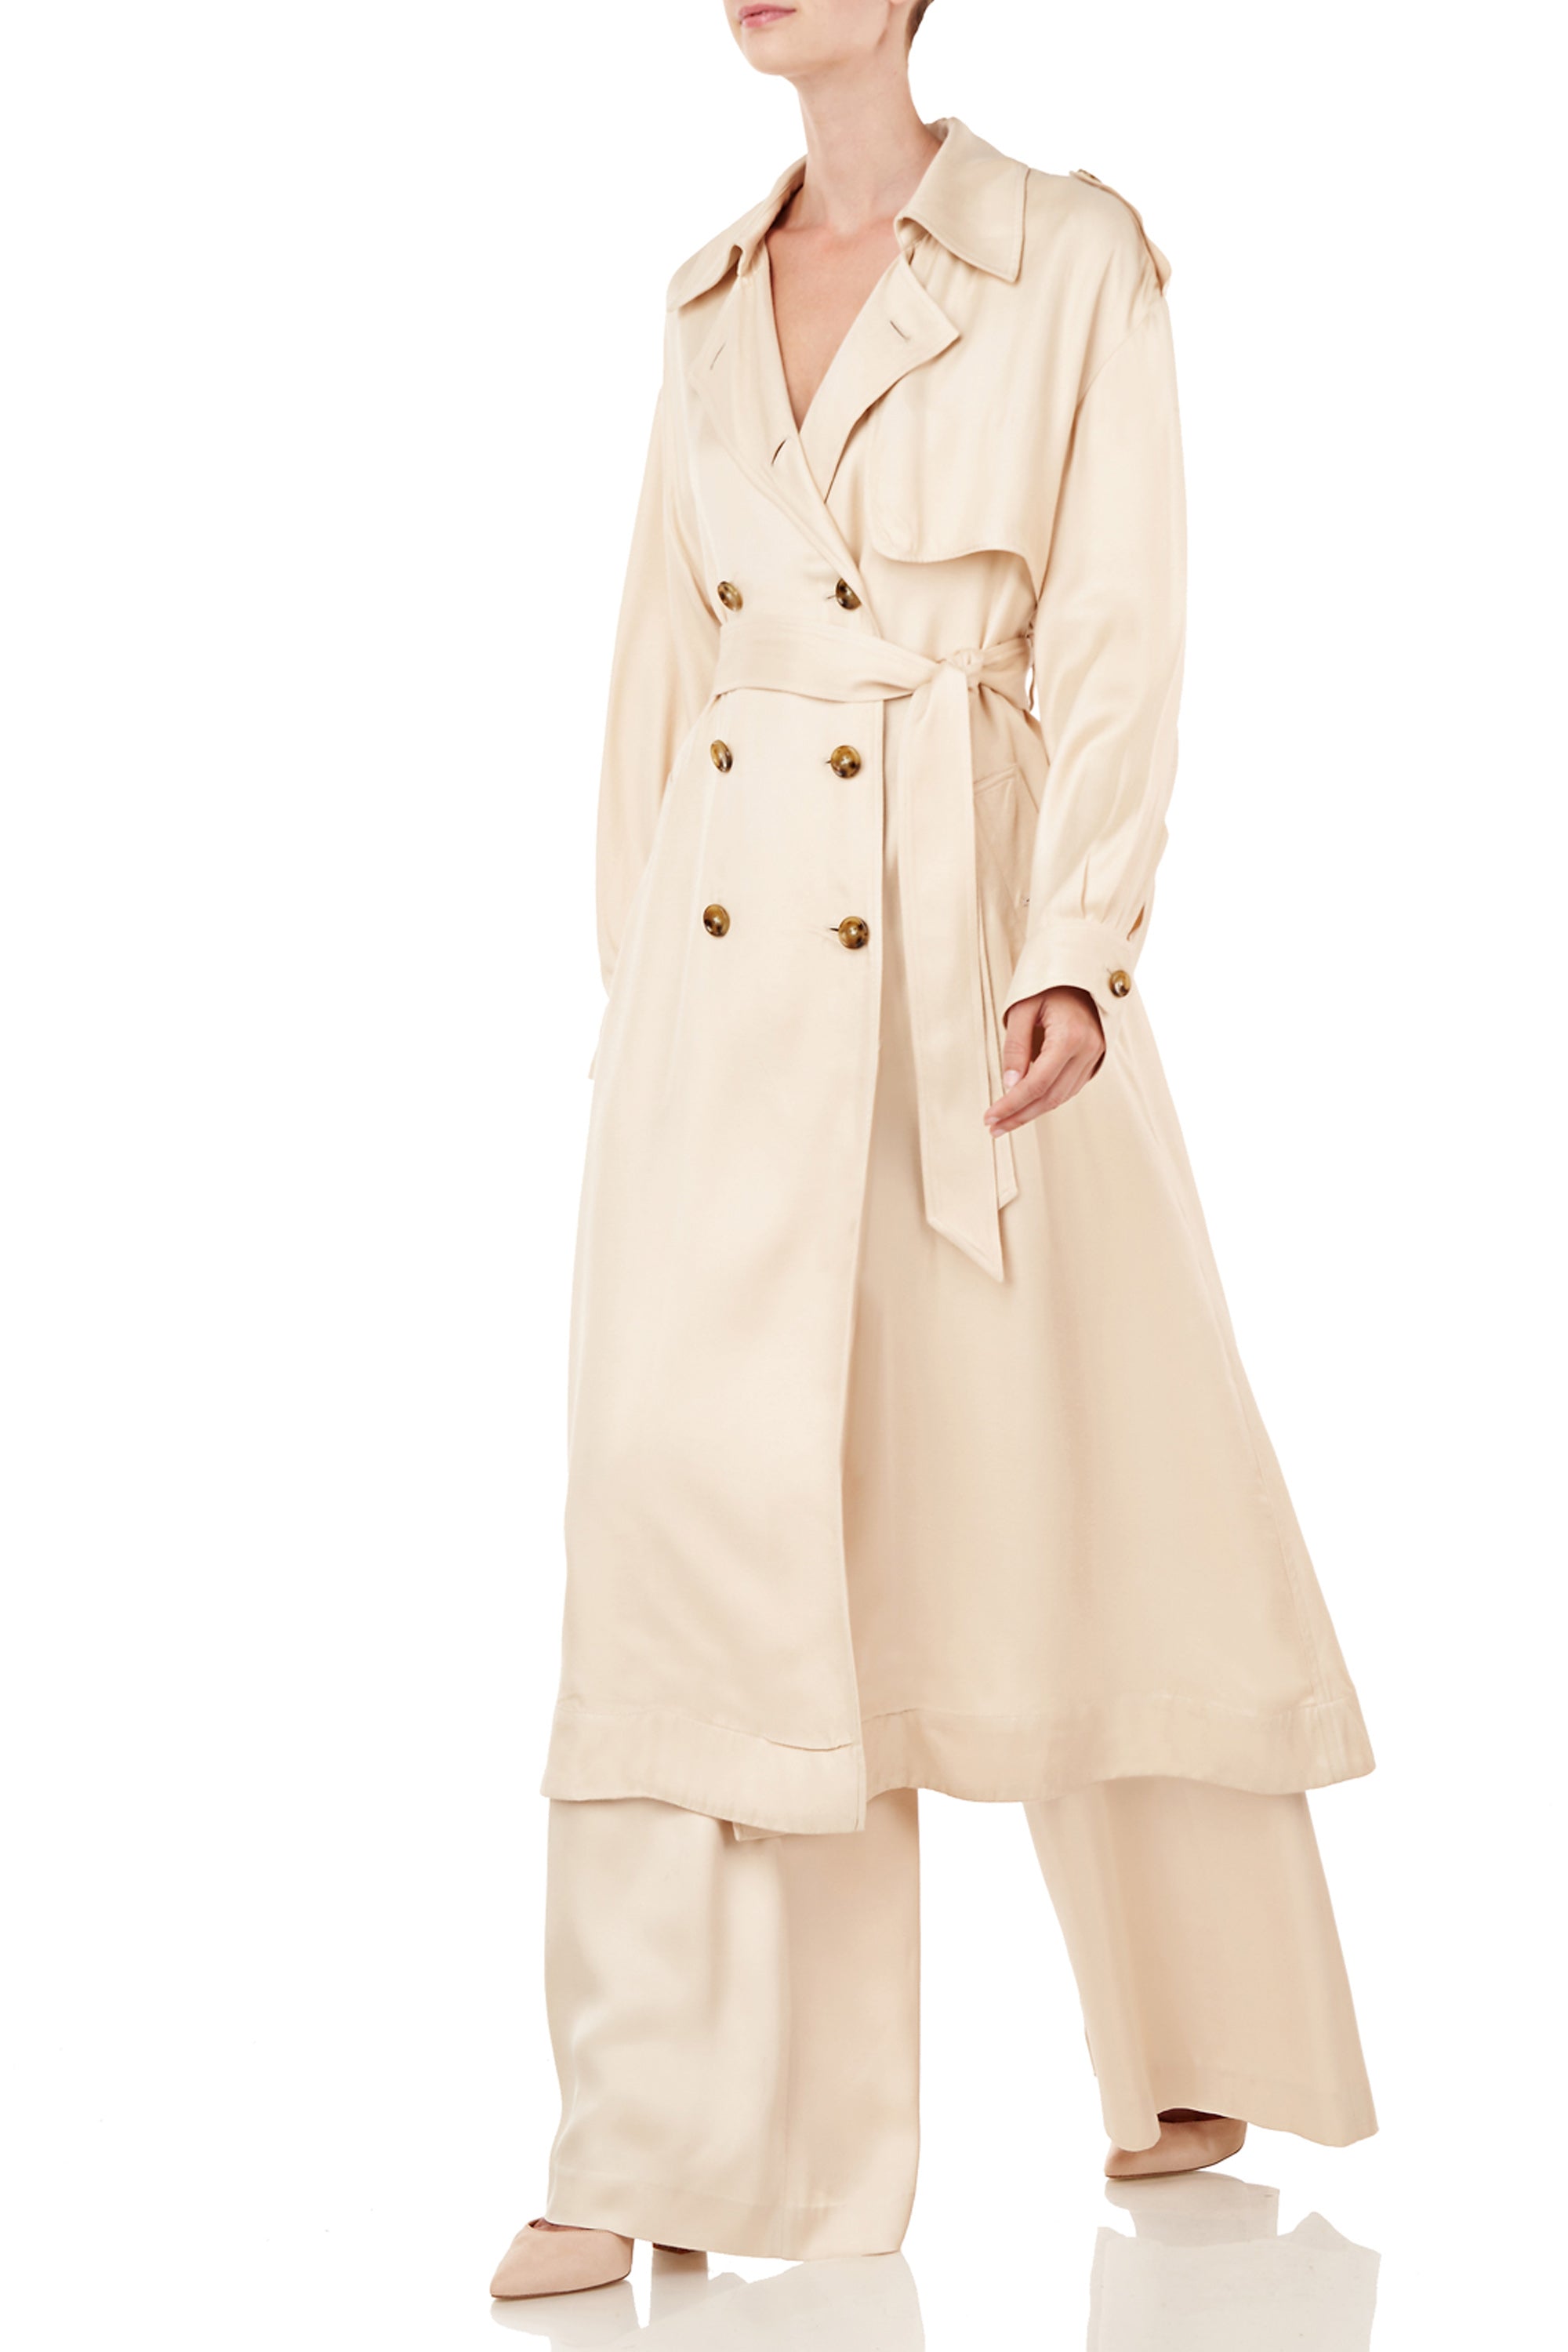 Althea Trench Coat